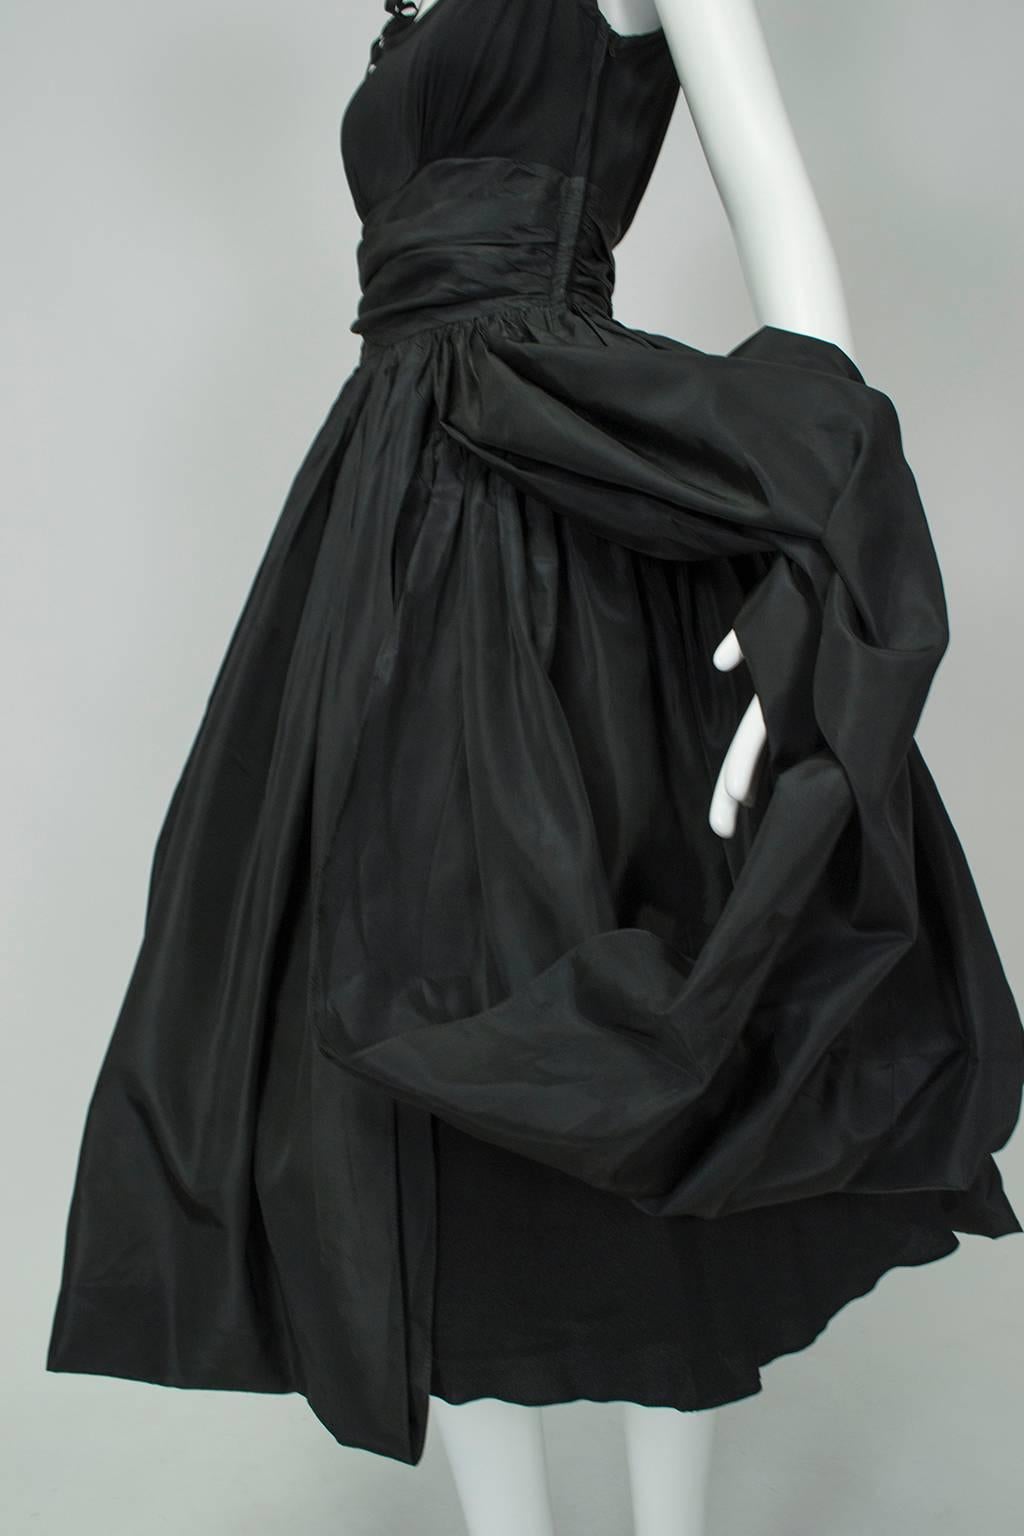 Black Shoulder Bow Sabrina Dress with Looping Car Wash Skirt - XS, 1950s For Sale 2